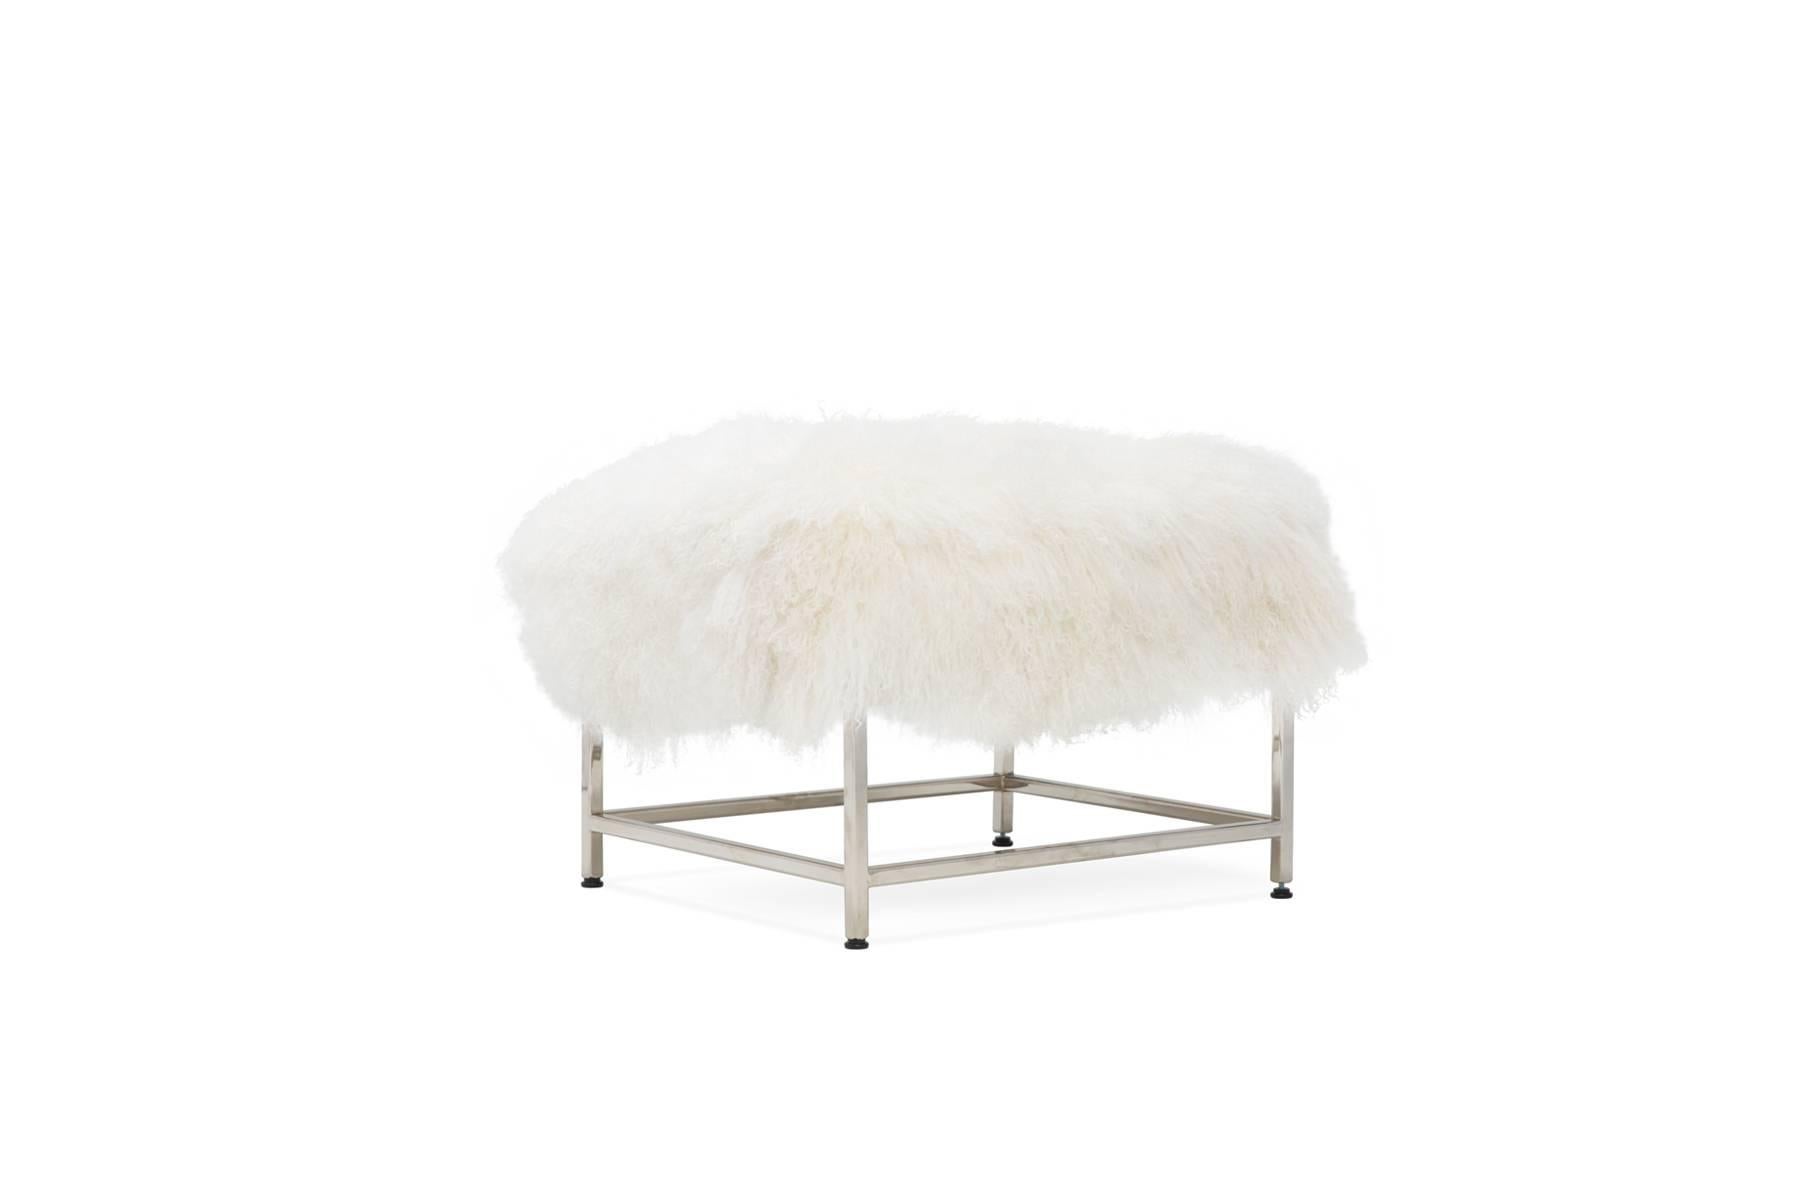 Designed to pair with any of the seating options from Stephen Kenn's Inheritance Collection, the ottoman is a great addition to add a lounge element to your seating arrangement. 

This variation is upholstered in luxurious white Mongolian sheepskin.